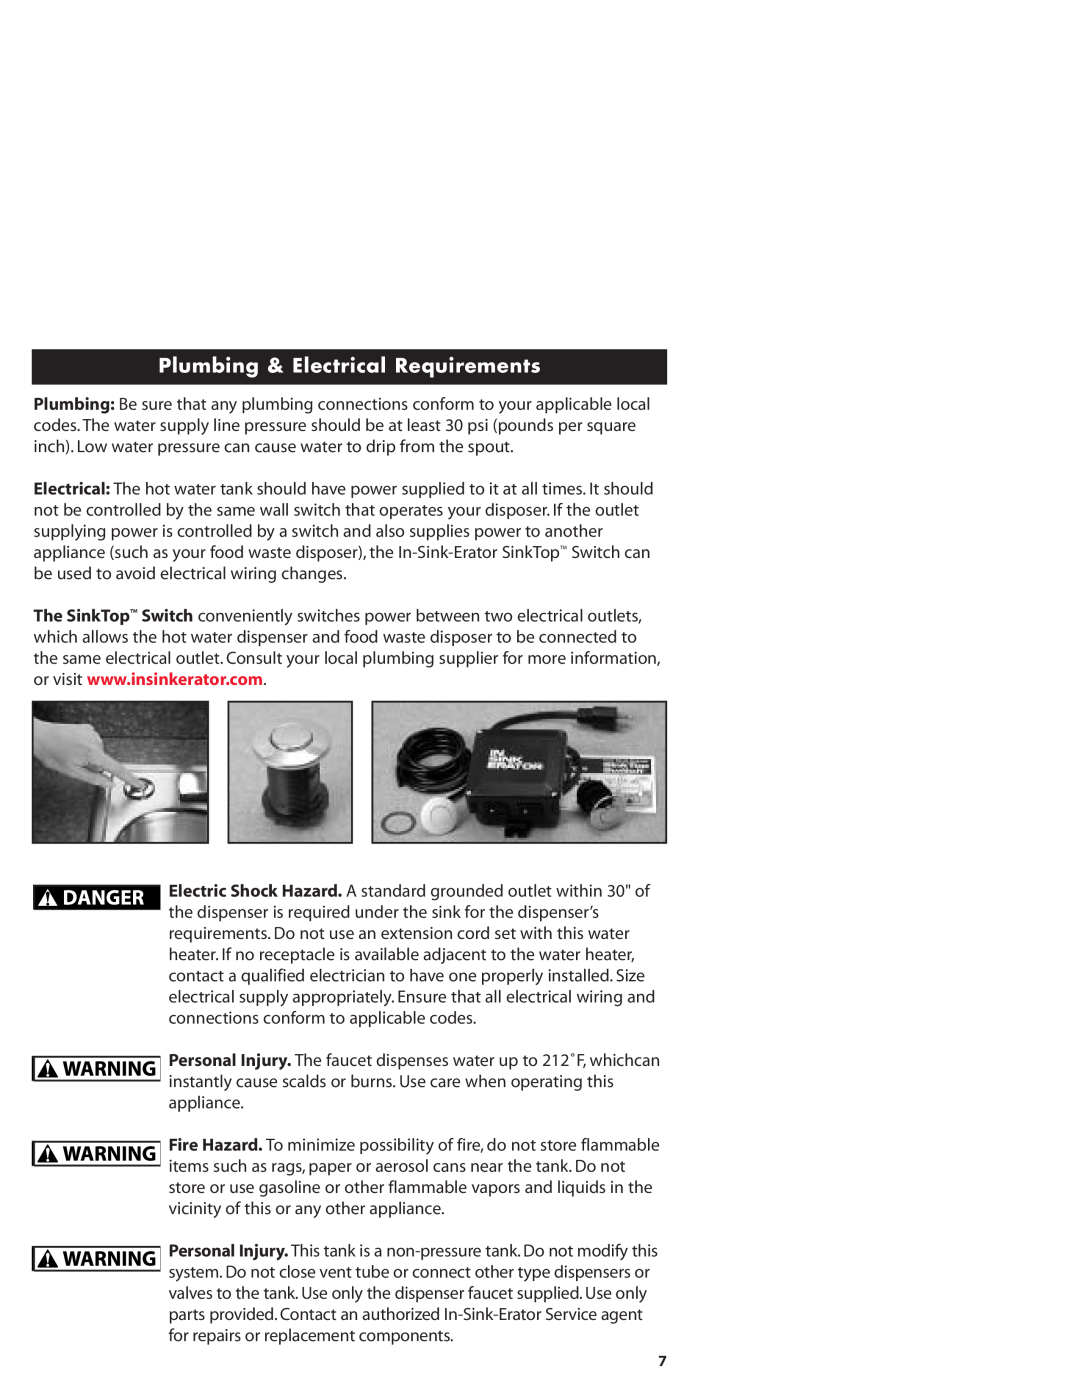 InSinkErator HC1100, GN1100 owner manual Plumbing & Electrical Requirements 